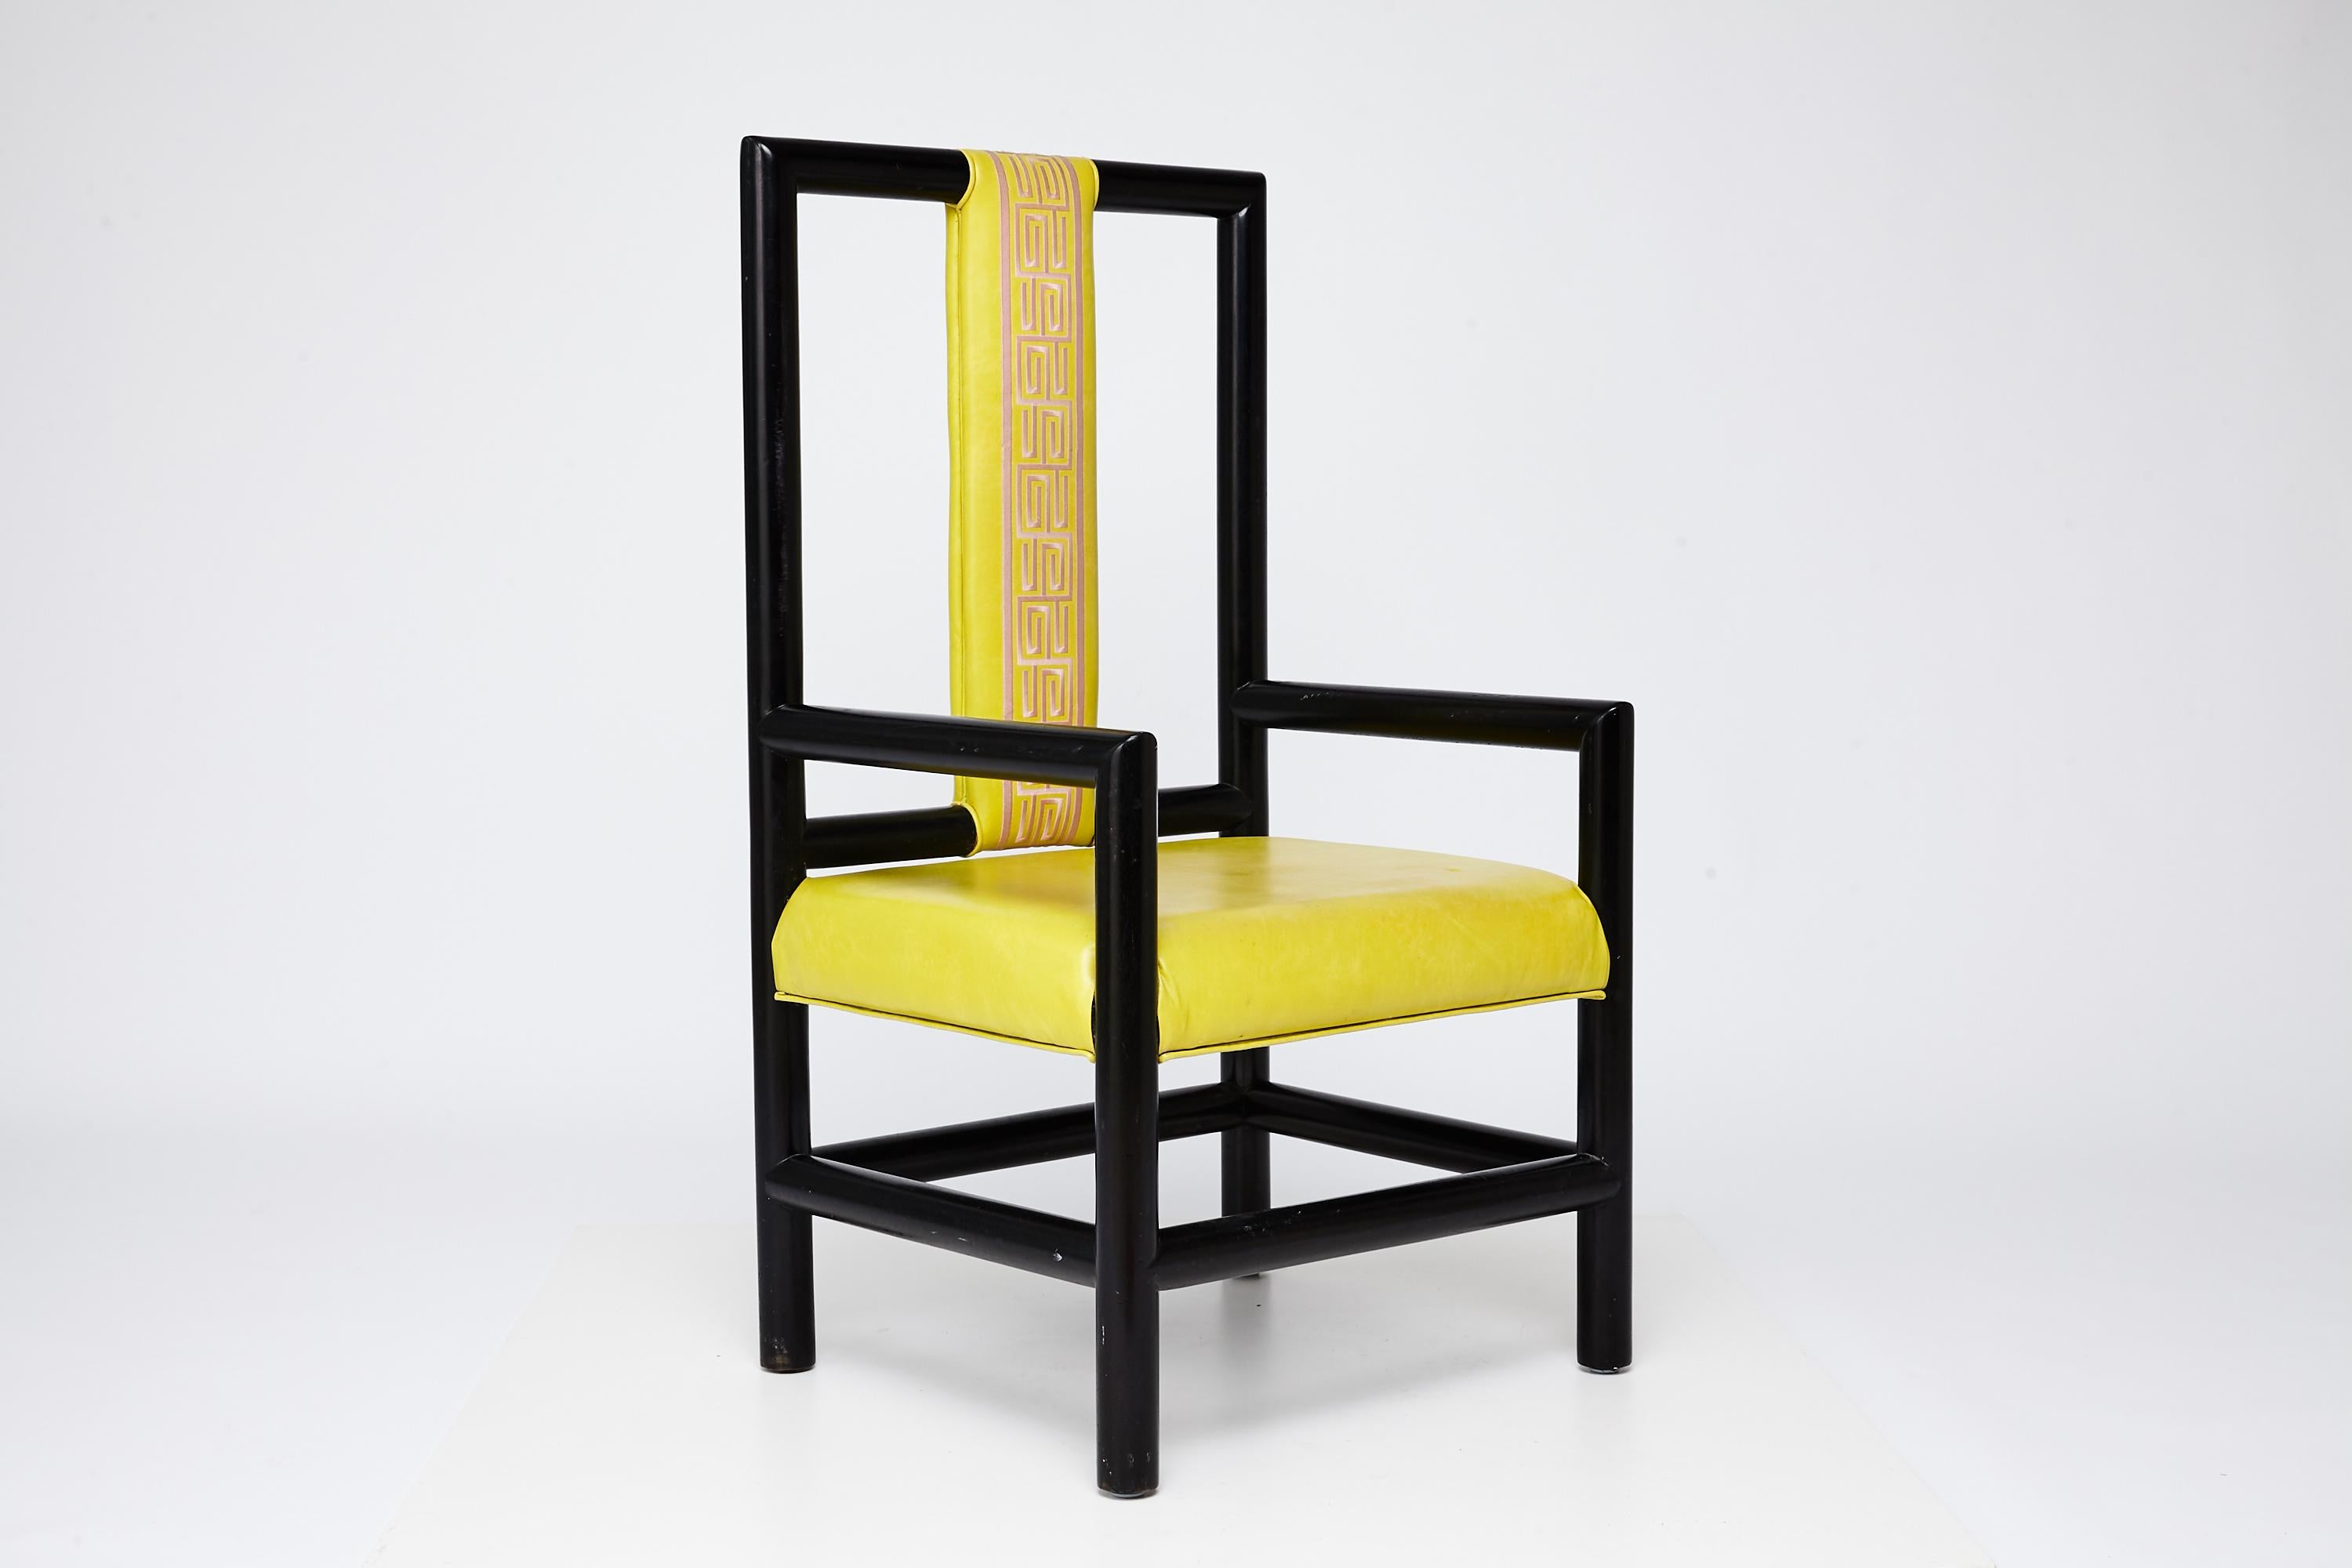 Hollywood Regency Pair of High Back Armchair by Kelly Wearstler for the Viceroy Hotel